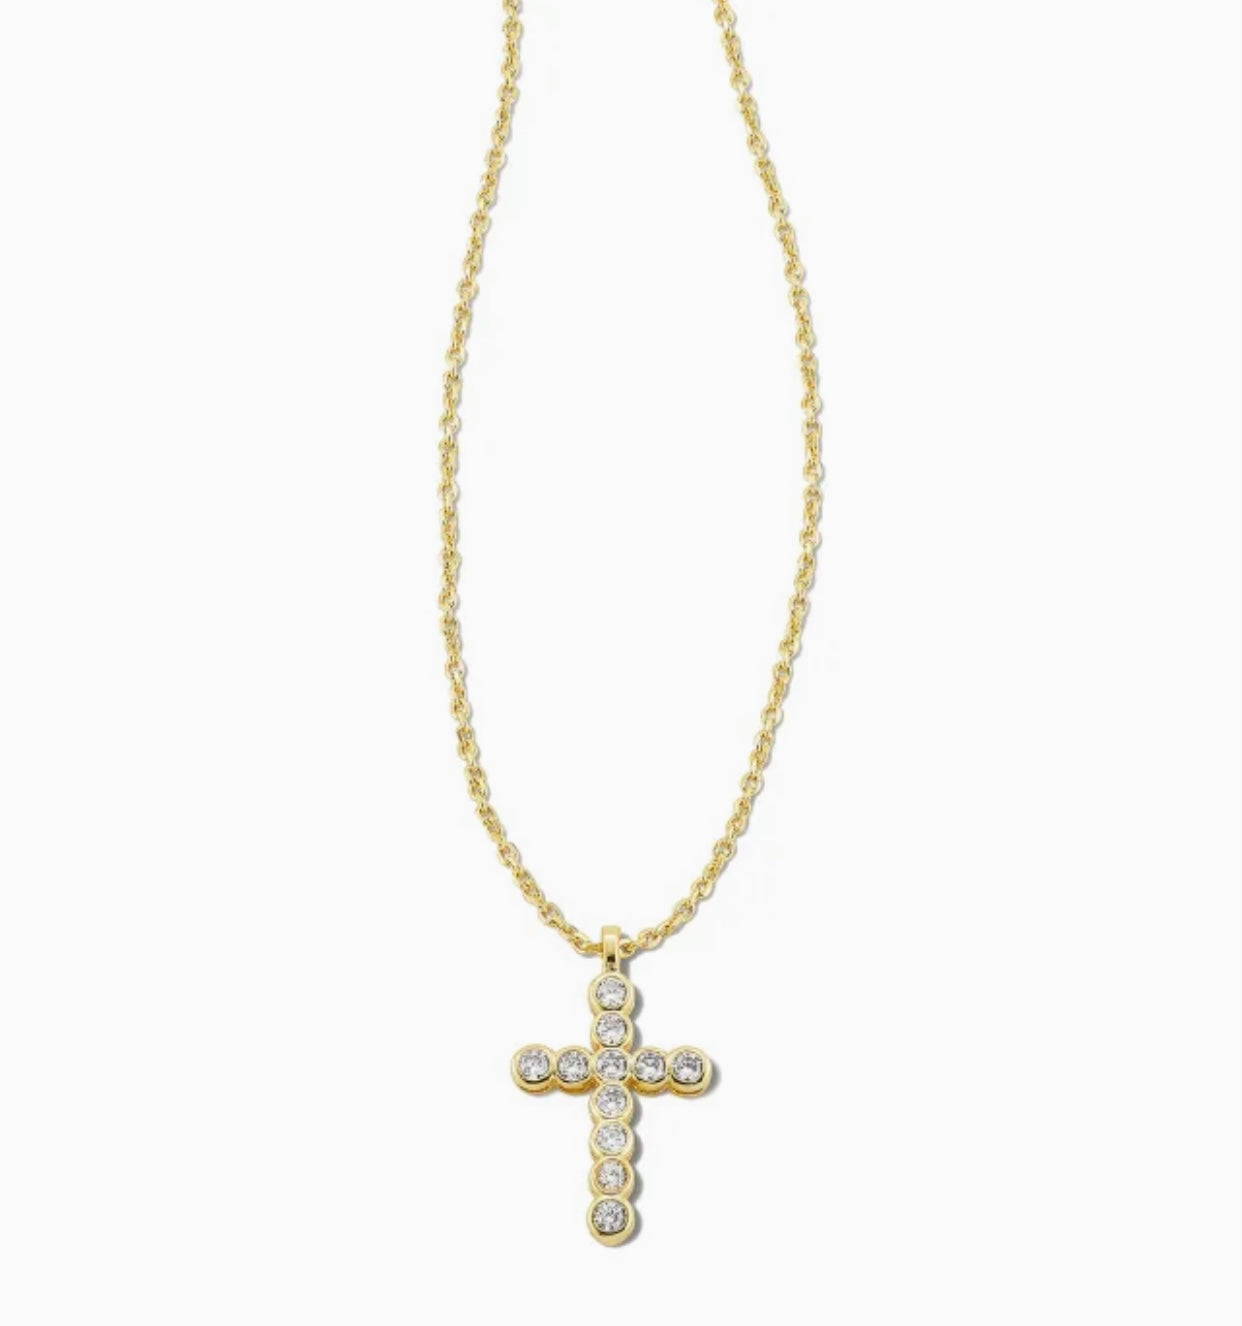 Cross White Crystal Pendant Gold Necklace